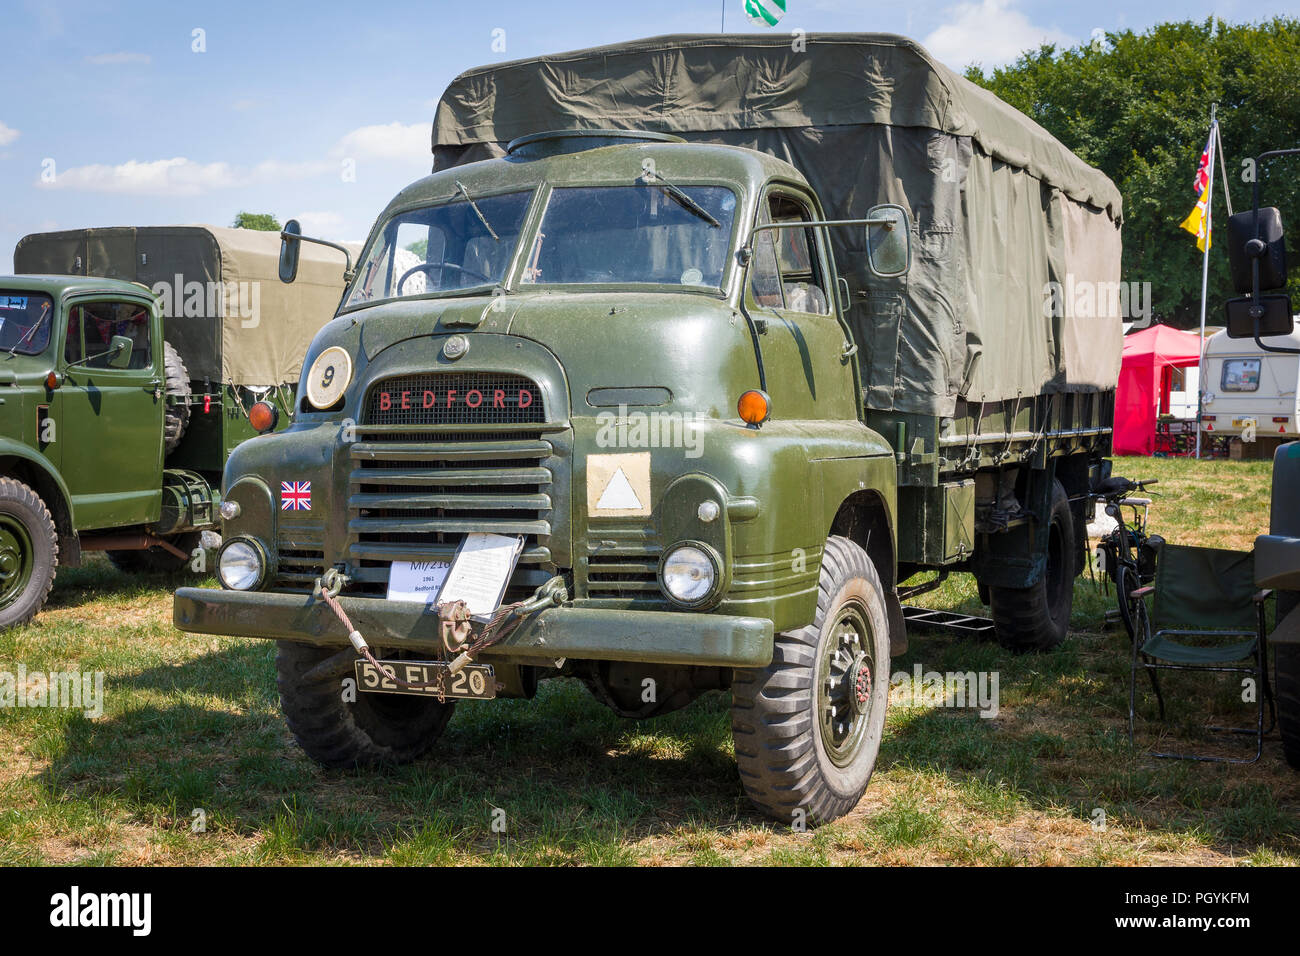 A British Bedford RL ex-military vehicle at Heddington Country Show  Wiltshire UK 2018 Stock Photo